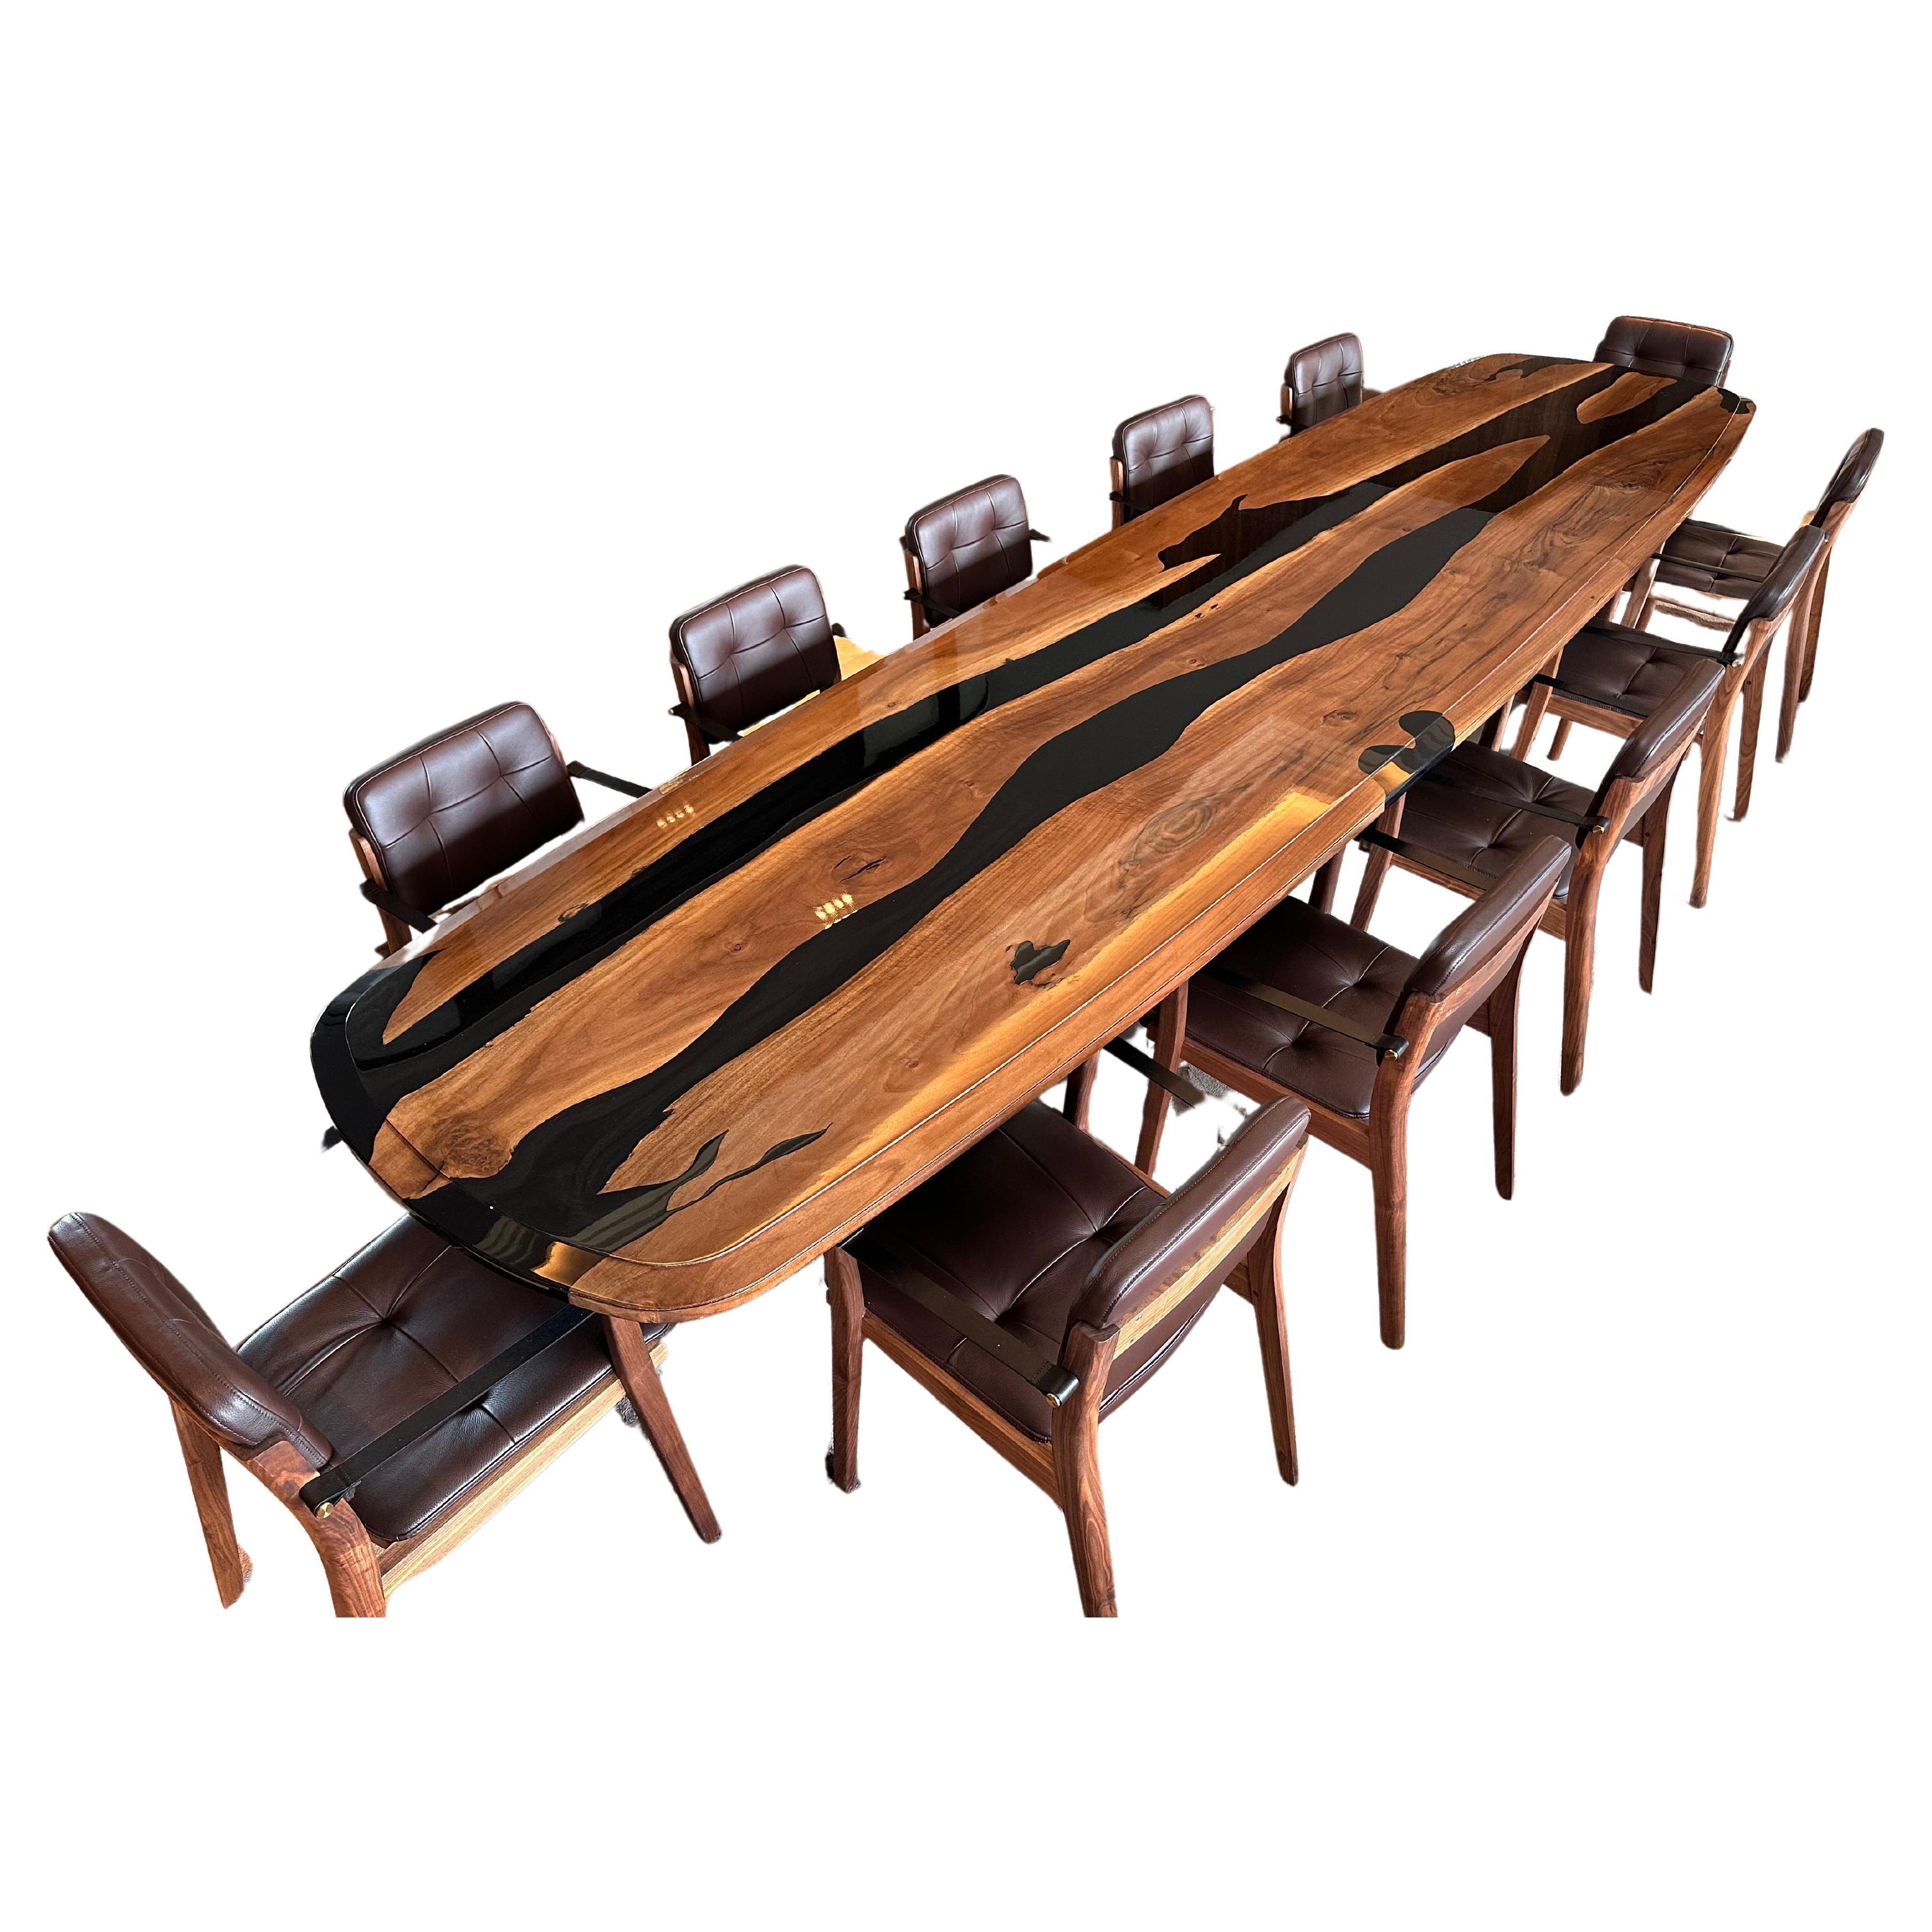 Very large dining table, 4m25 long, in American Walnut with dark blue/black resin inlay. 

Ideally for 10 to 12 people.

Table contours treated with a contemporary chamfer with raised edges.

High-gloss polished finish (intense varnish).

Wood base